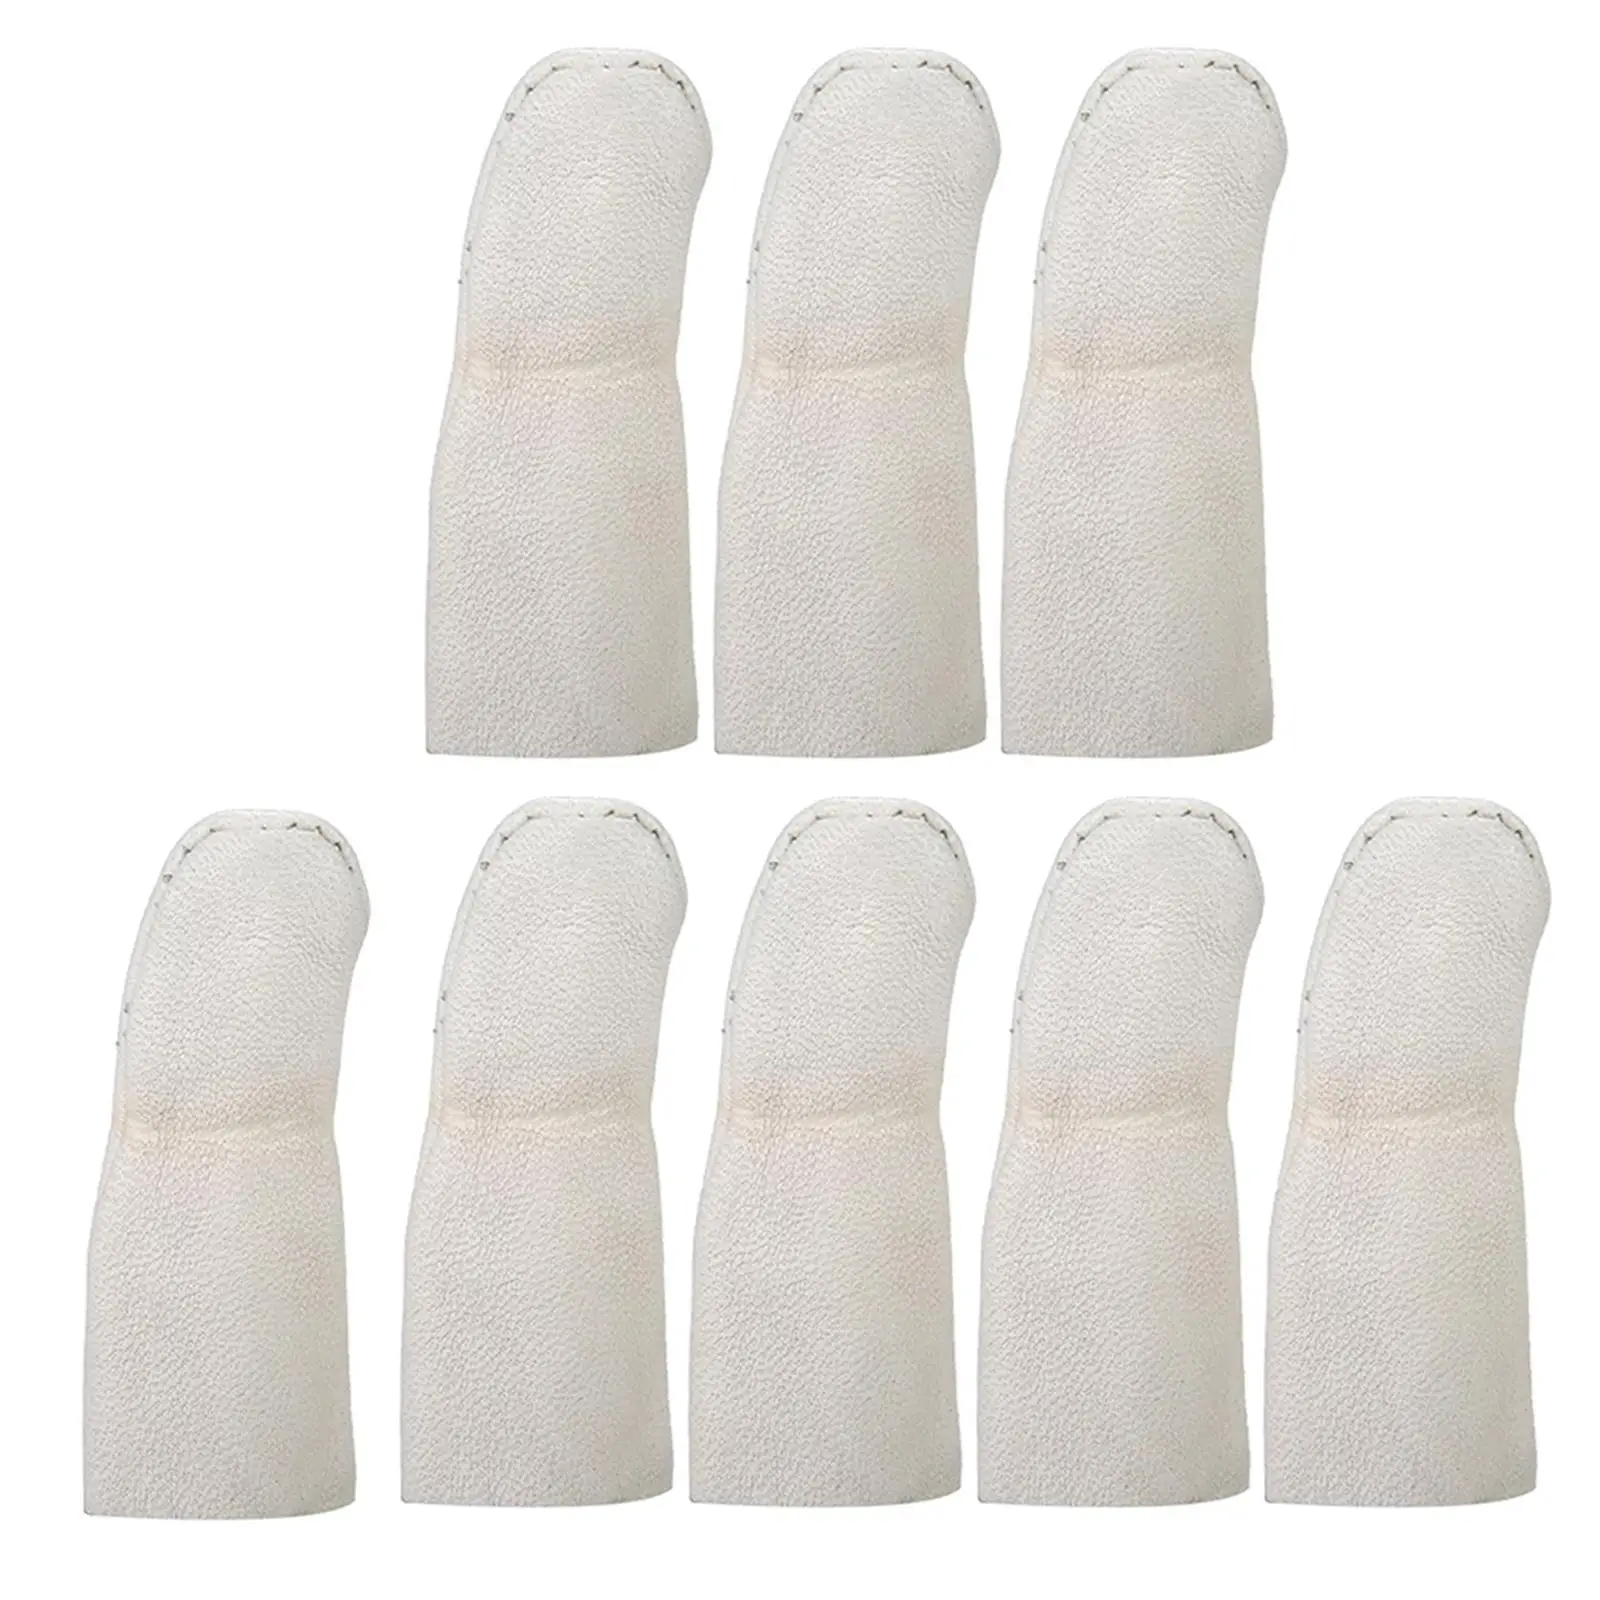 

8x PU Leather Finger Cots Fingers Protective Sleeves for Woodworking Work